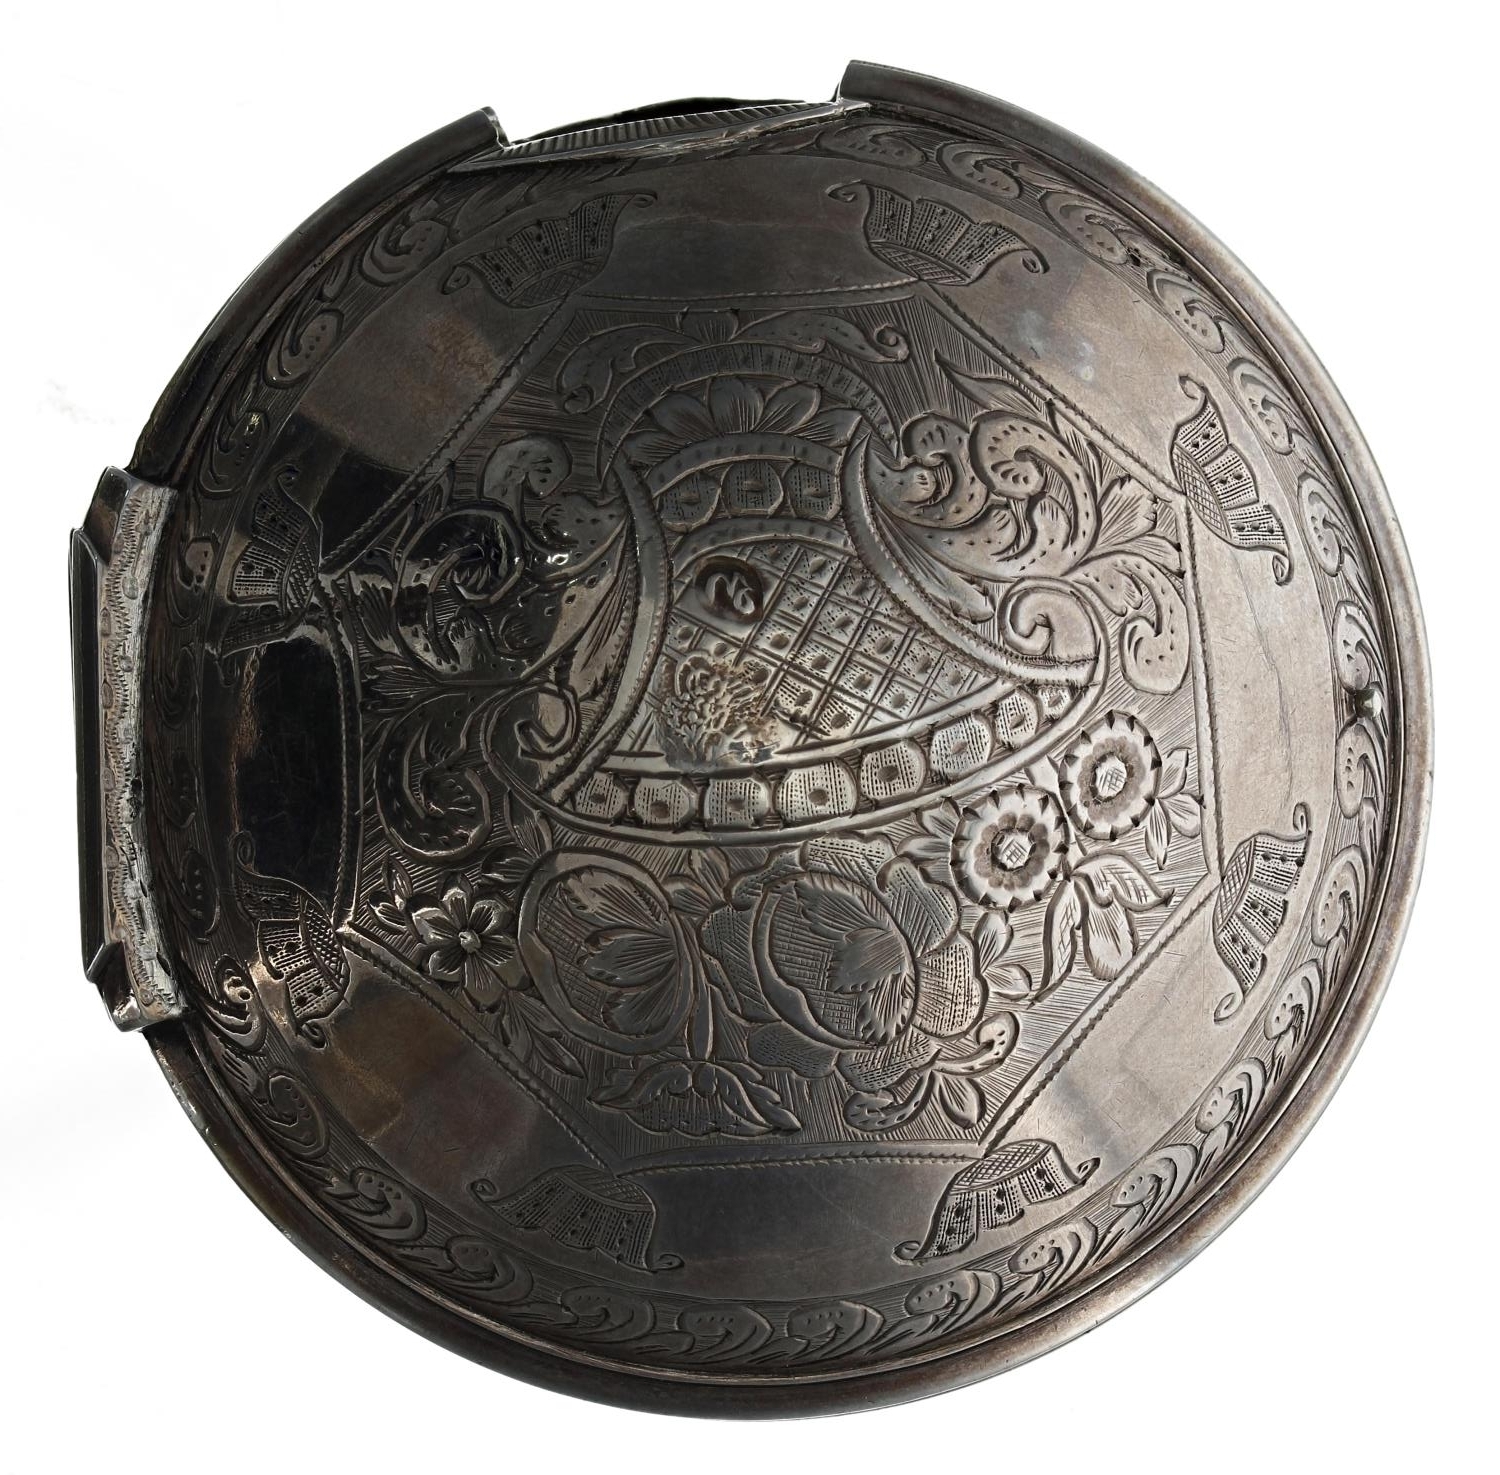 Attractive white metal engraved high domed outer pocket watch case probably for the Turkish